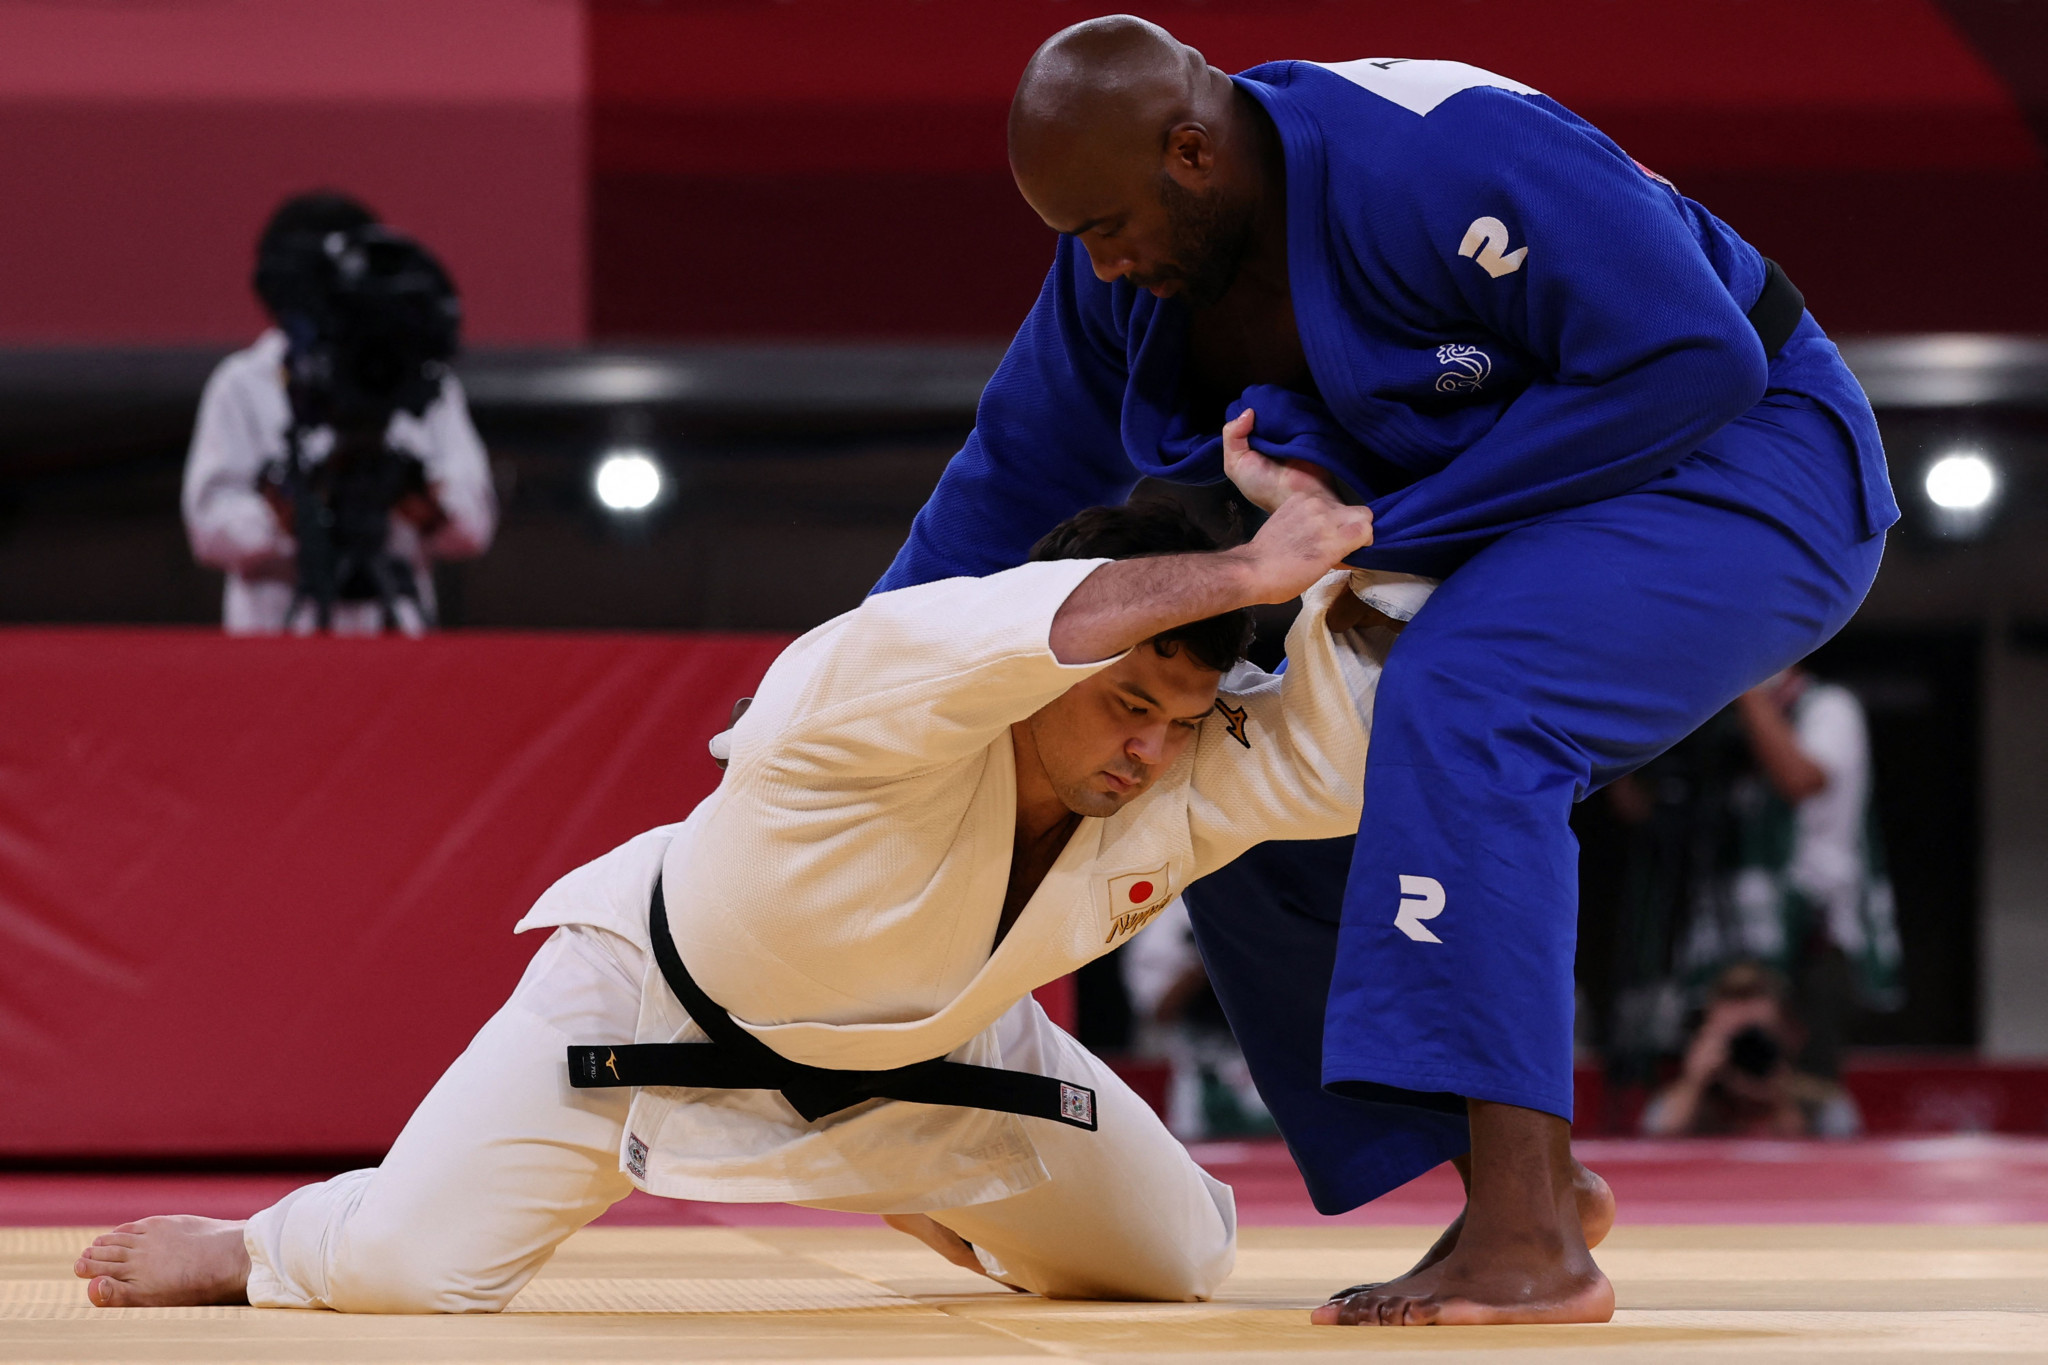 Tickets for seven sports including judo have sold out in the first ticketing phase for Paris 2024, but there has been criticism of the pricing structure ©Getty Images